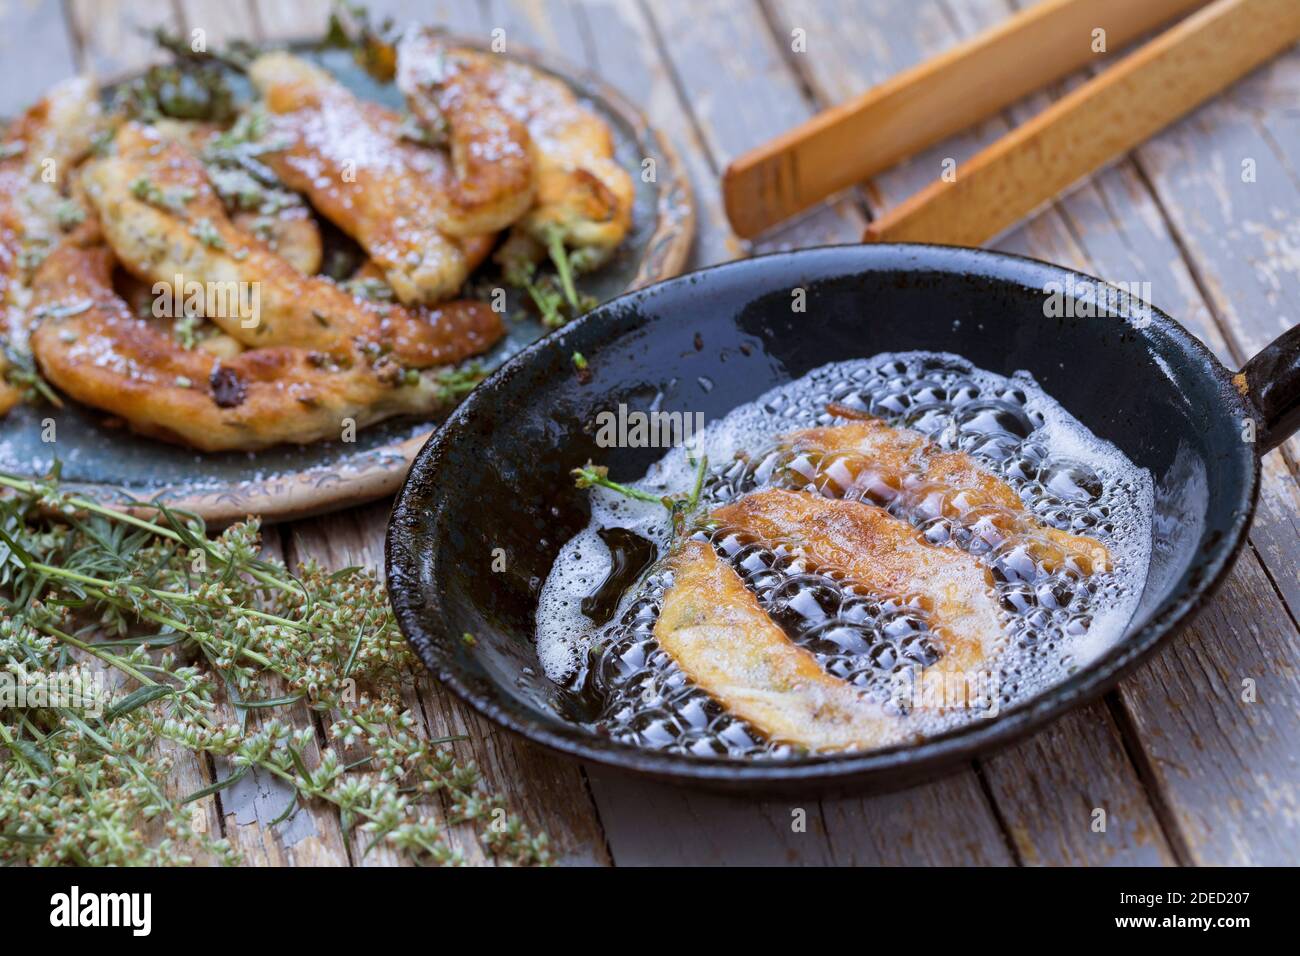 common mugwort, common wormwood (Artemisia vulgaris), home-baked small mugwort cakes, blossoms, leaves and sprout from wormwood are dipped in pancake Stock Photo